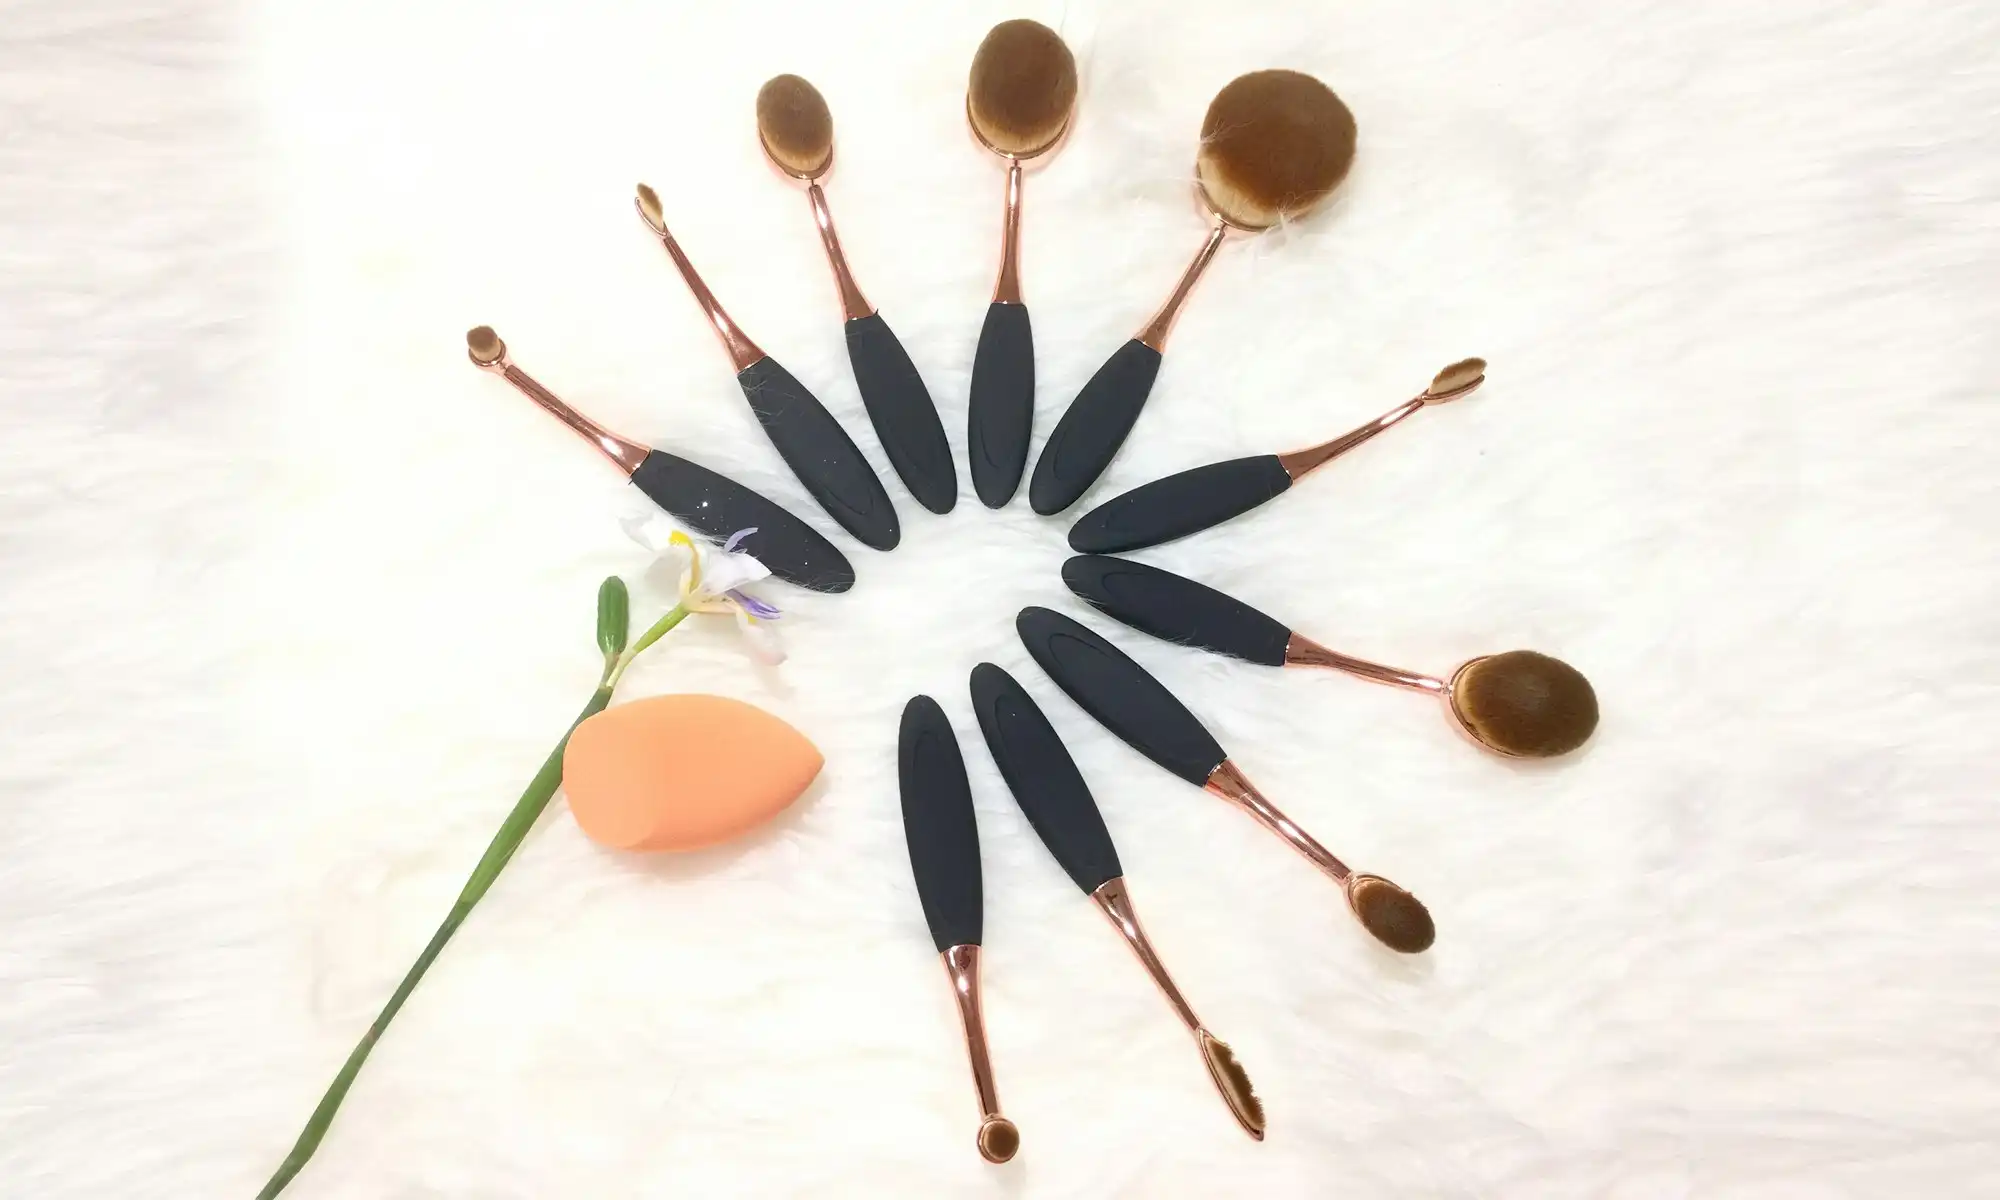 10 Piece Professional Oval Makeup Brush Set All In One Rose Gold